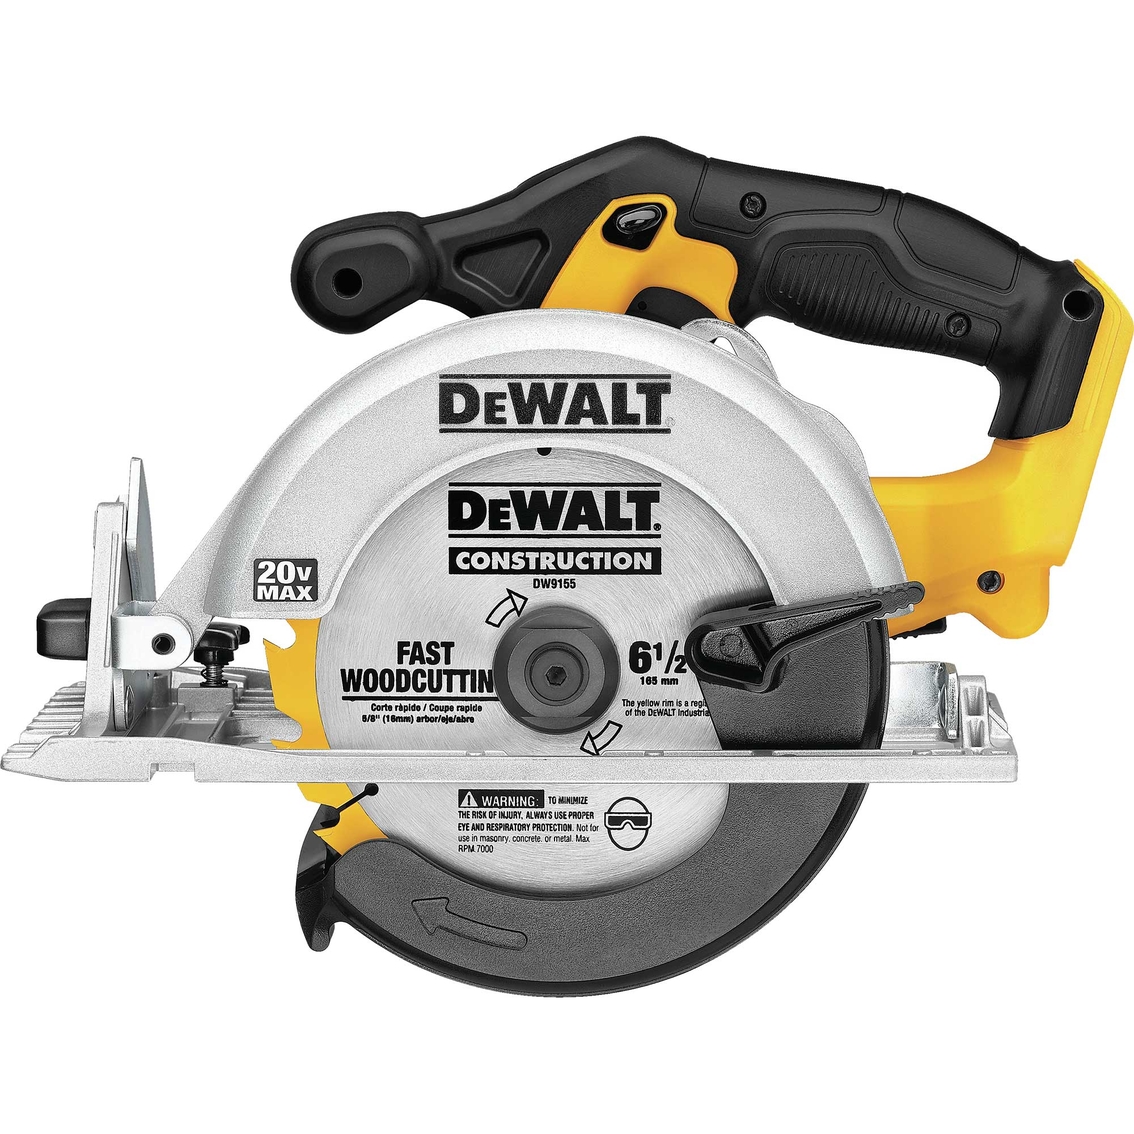 DeWalt 20V MAX* 6-1/2 in. Circular Saw (Tool Only) - Image 2 of 2